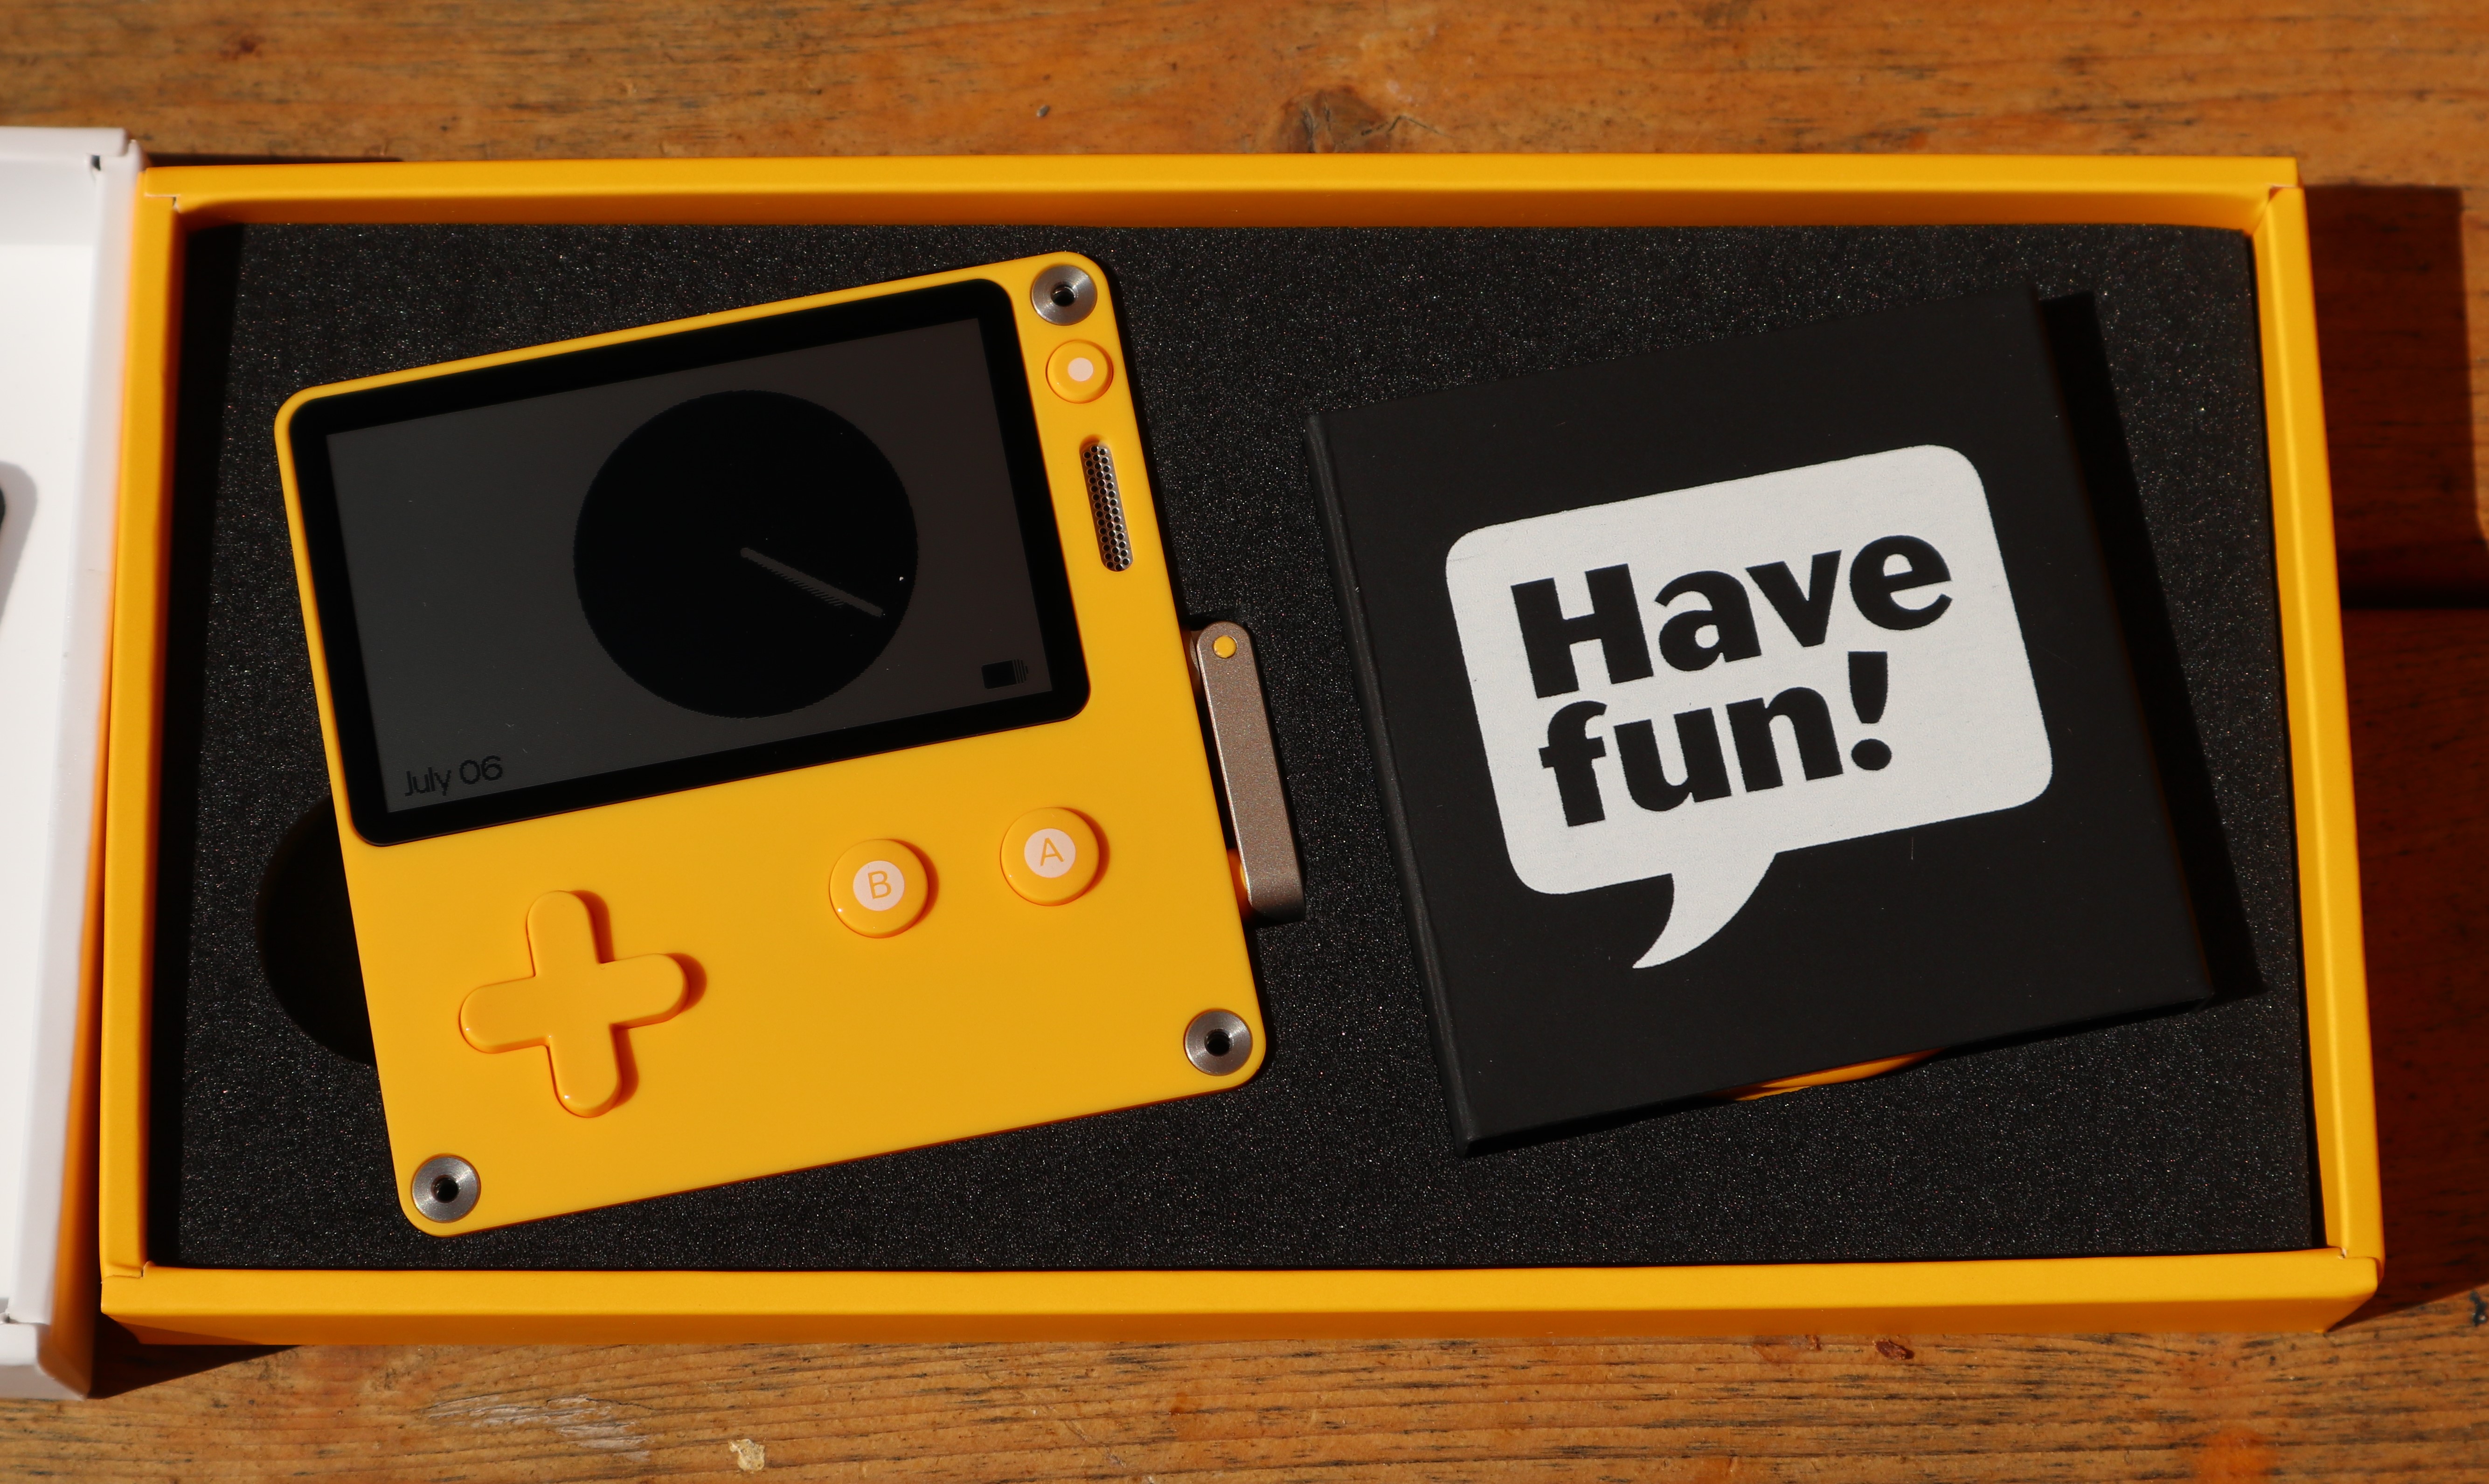 Playdate preview: You won't believe how fun this dorky, $179 game